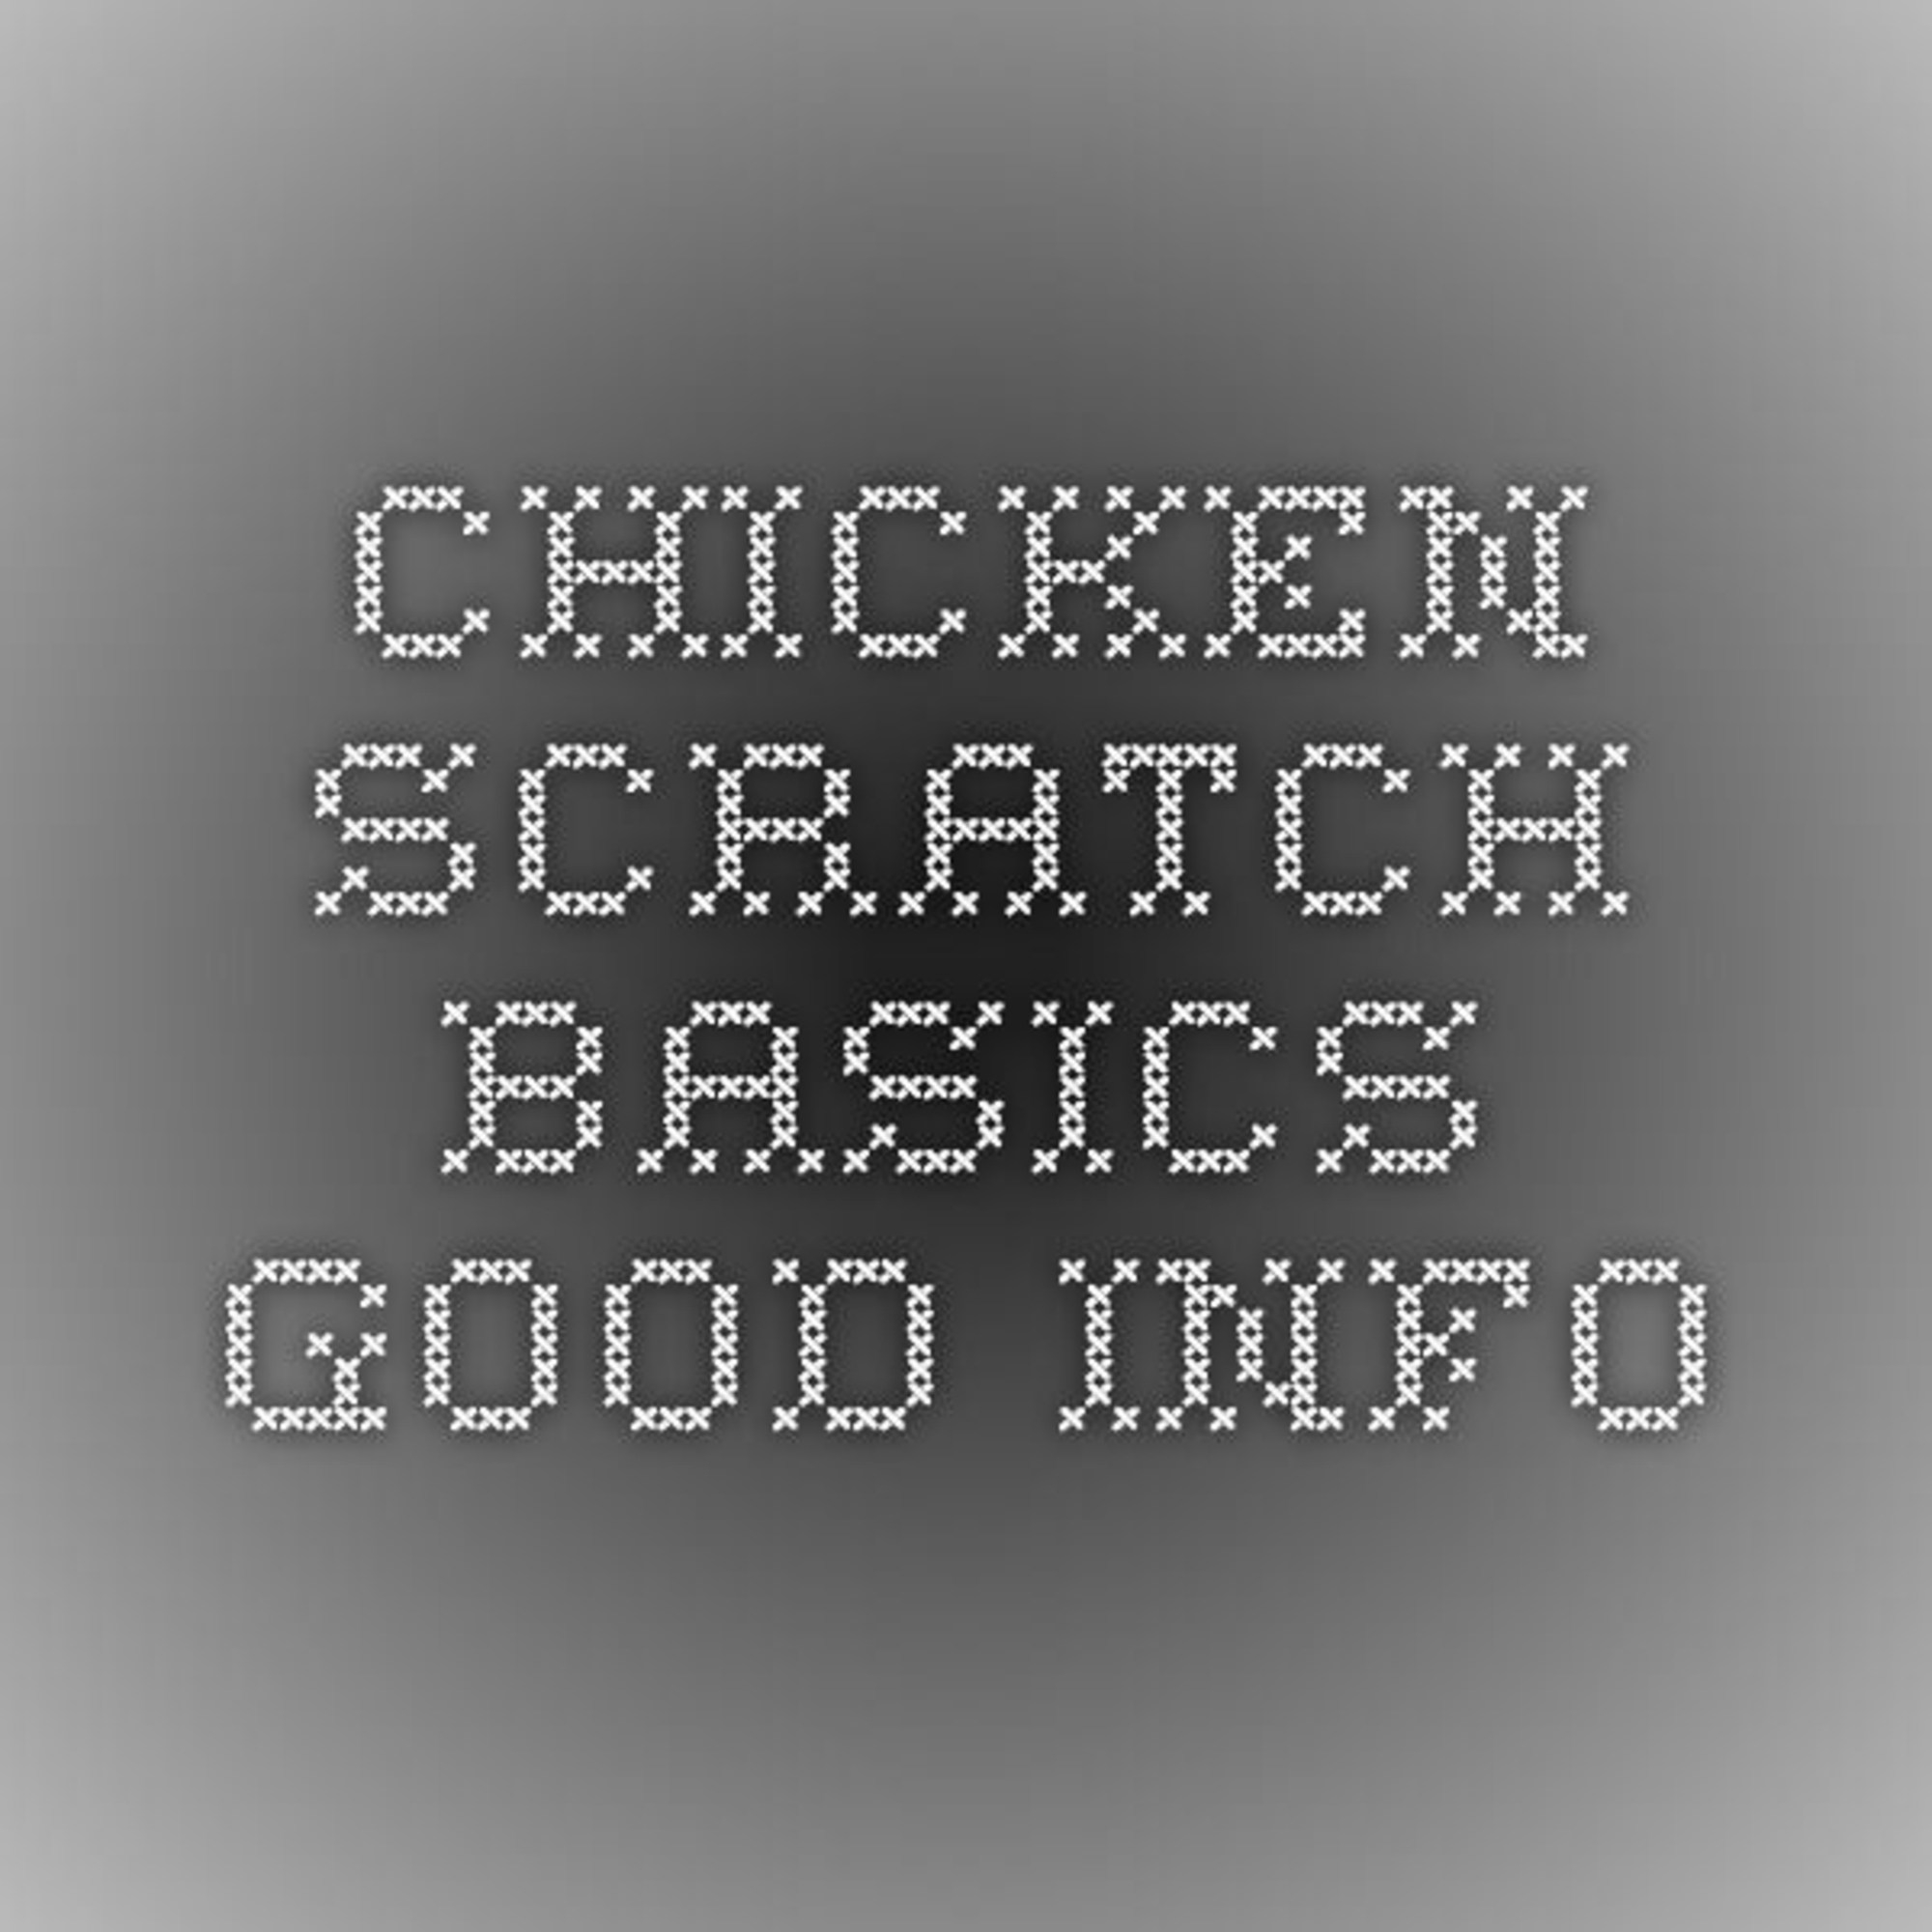 Printable Chicken Scratch Embroidery Pattern Get 36 Chicken Scratch Patterns Hd Wallpapers Pictpress